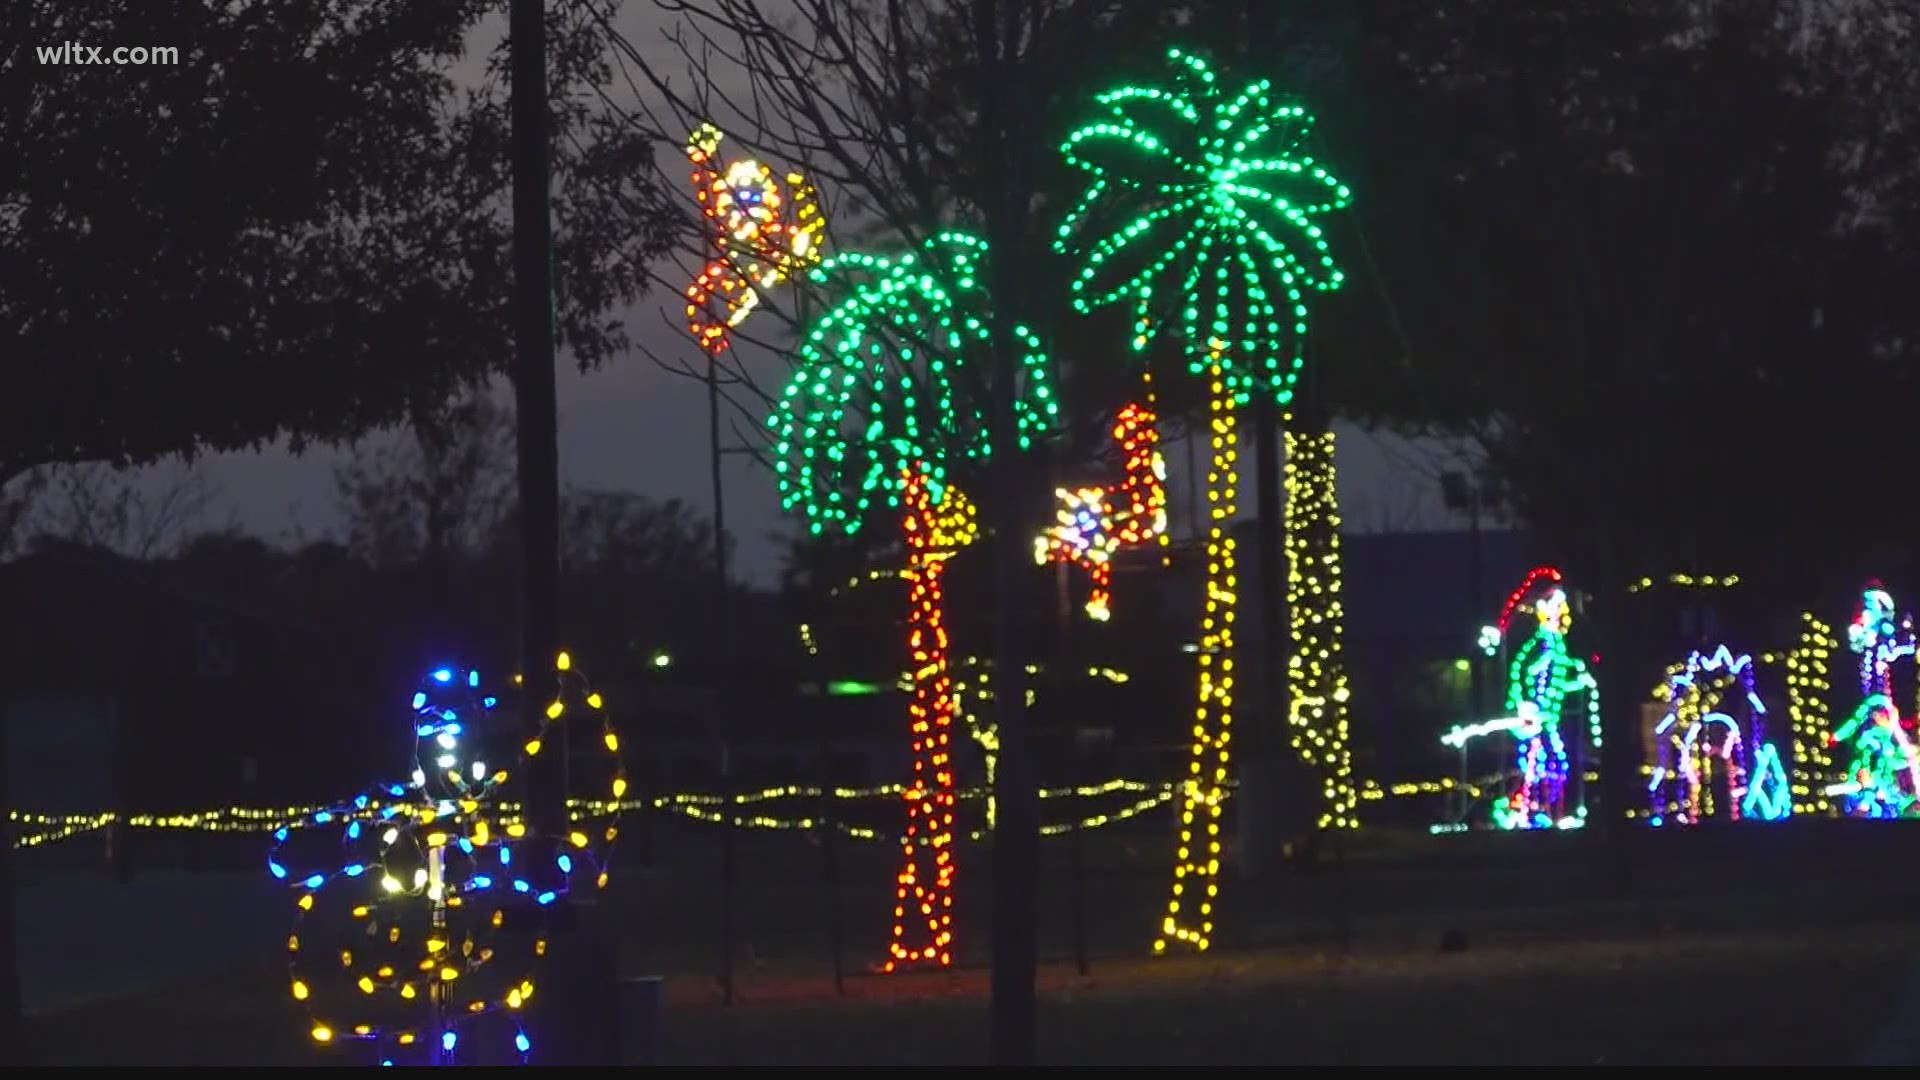 The South Carolina State Fairgrounds are home again to Christmas lights.